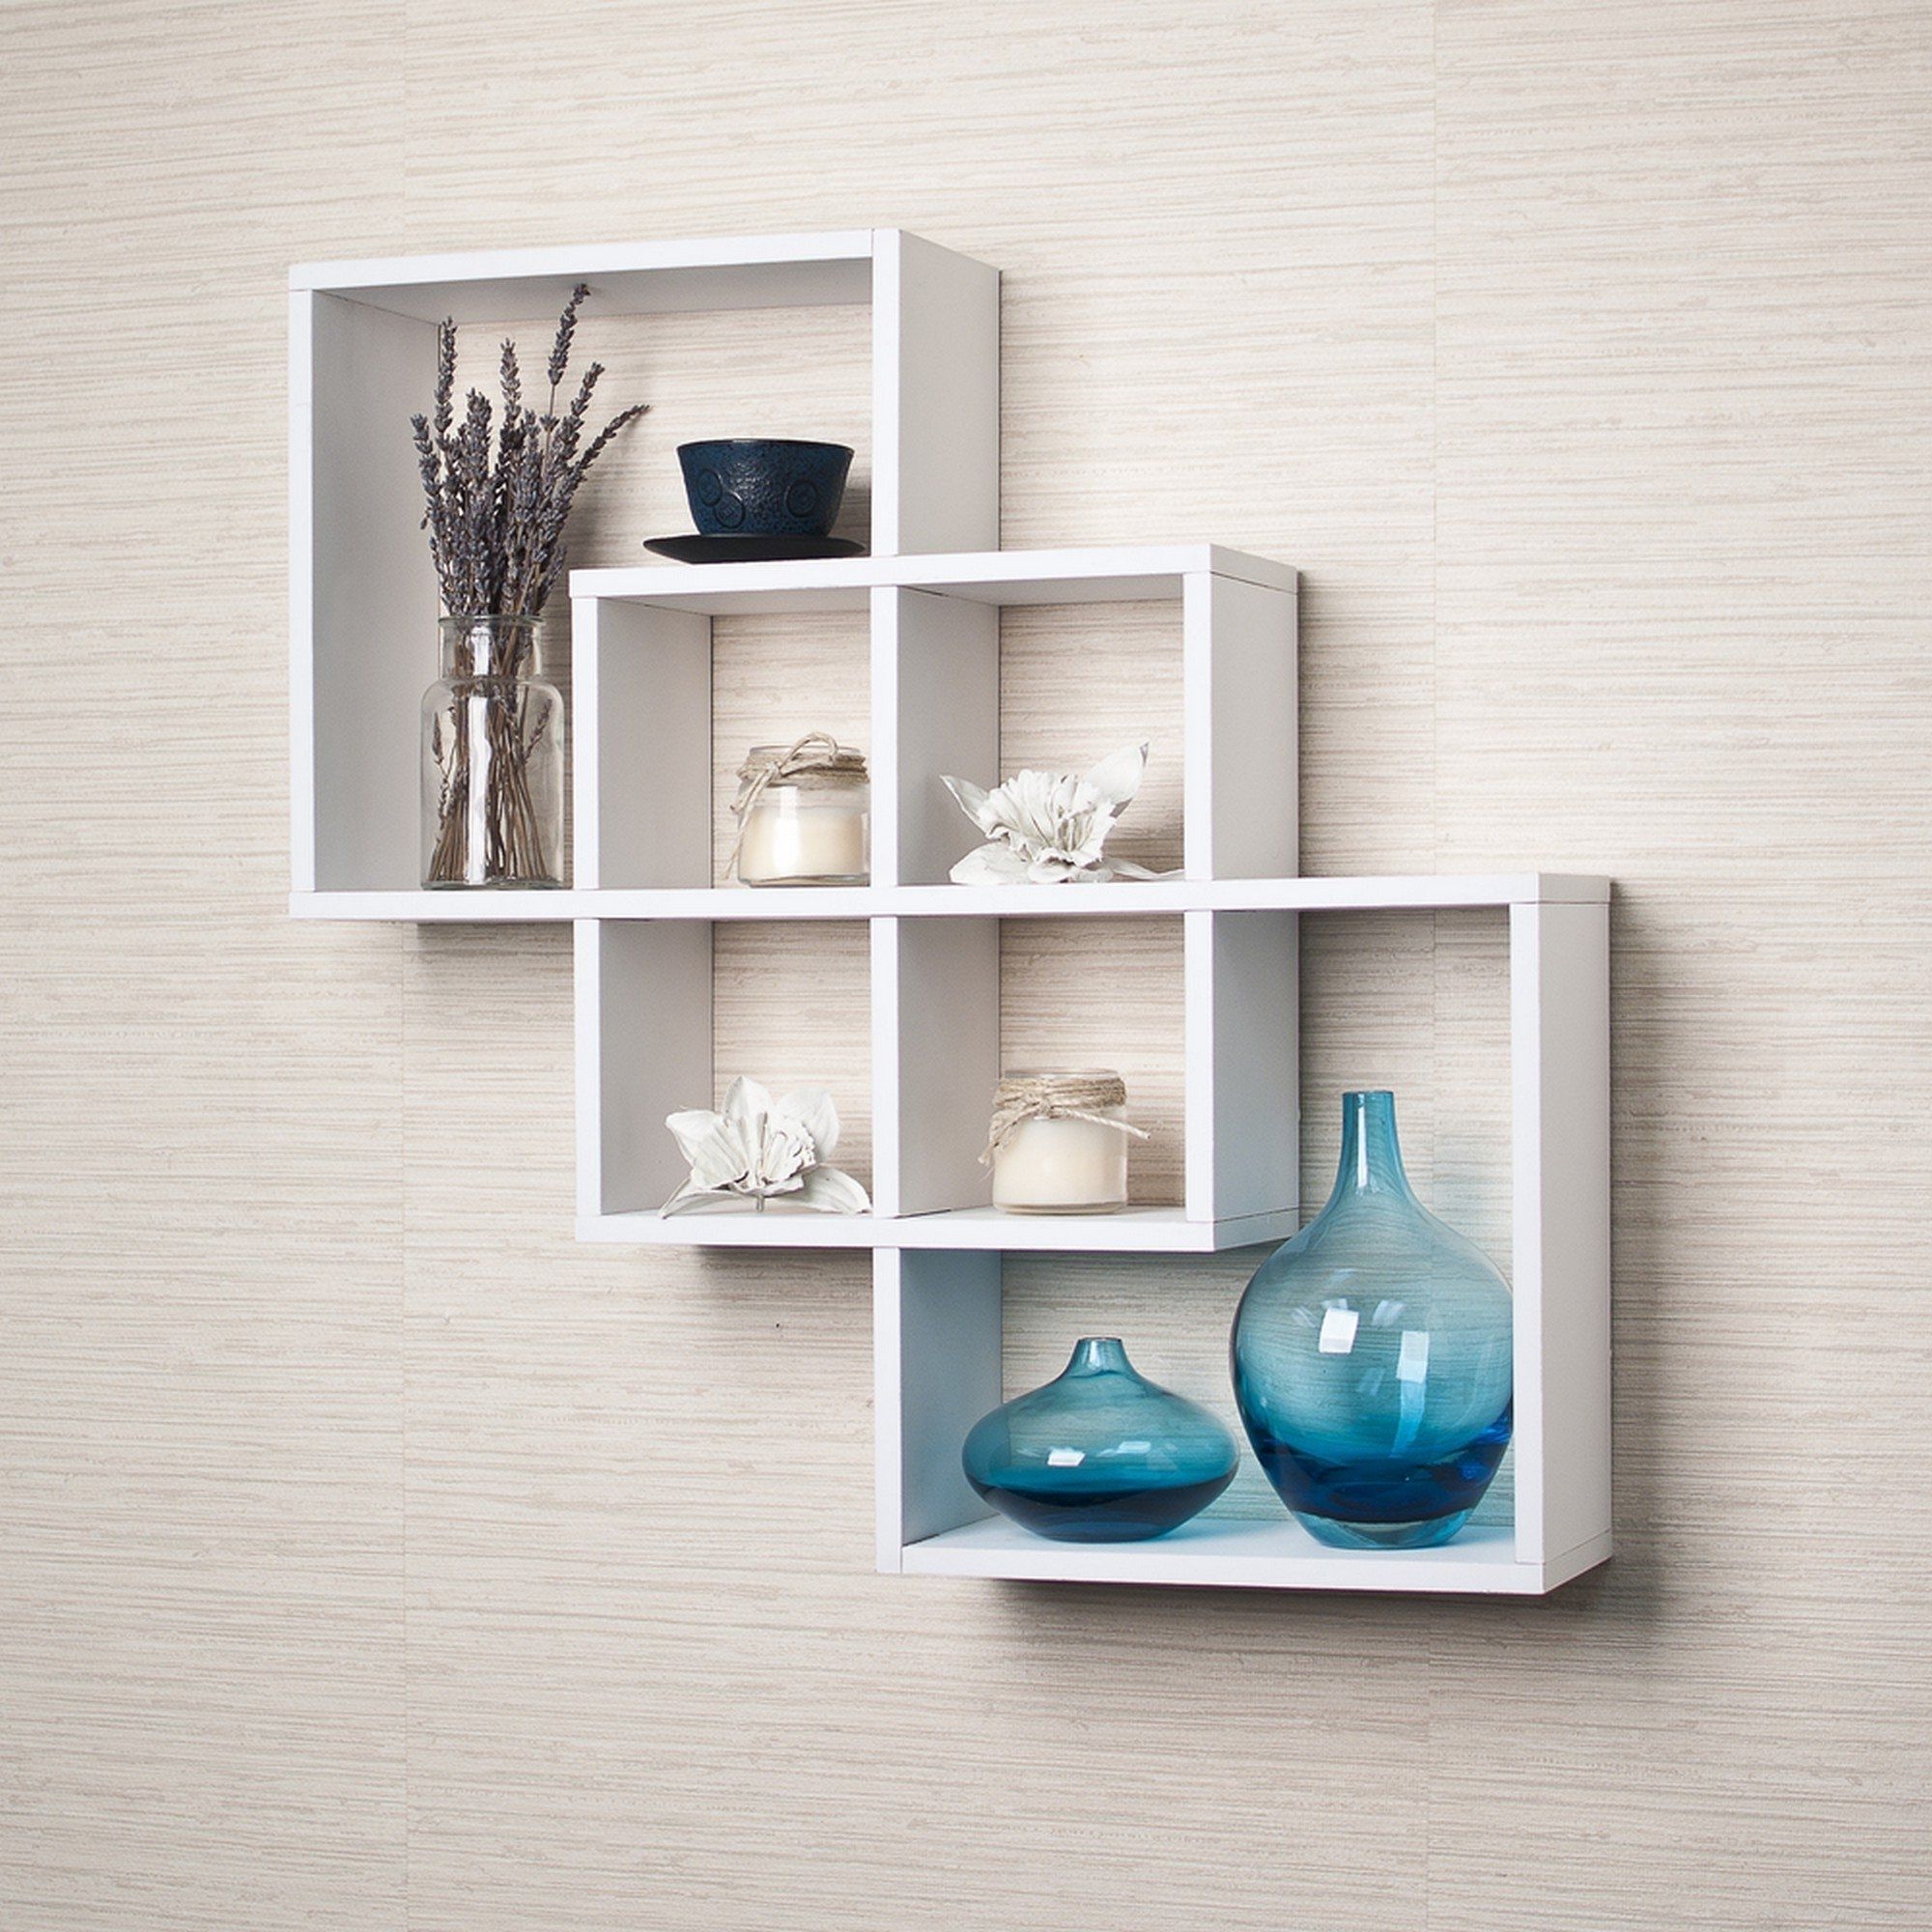 Recent Wooden Wall Shelves Intended For White Wooden Wall Shelves On Pale White Wall Of Contemporary Oval (View 12 of 15)